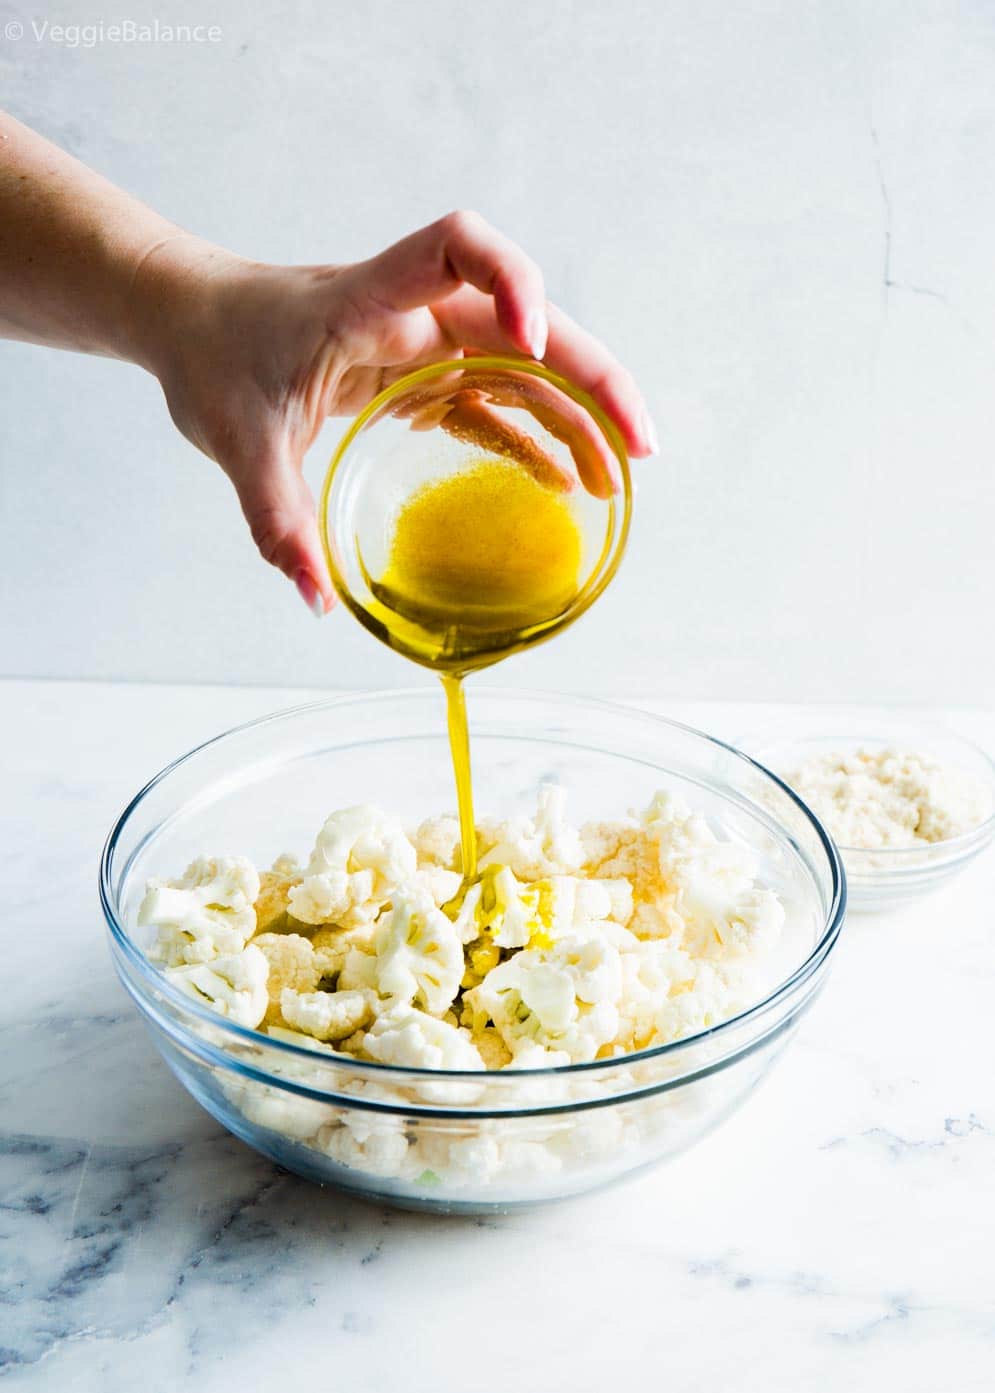 Pouring Olive Oil over roasted cauliflower